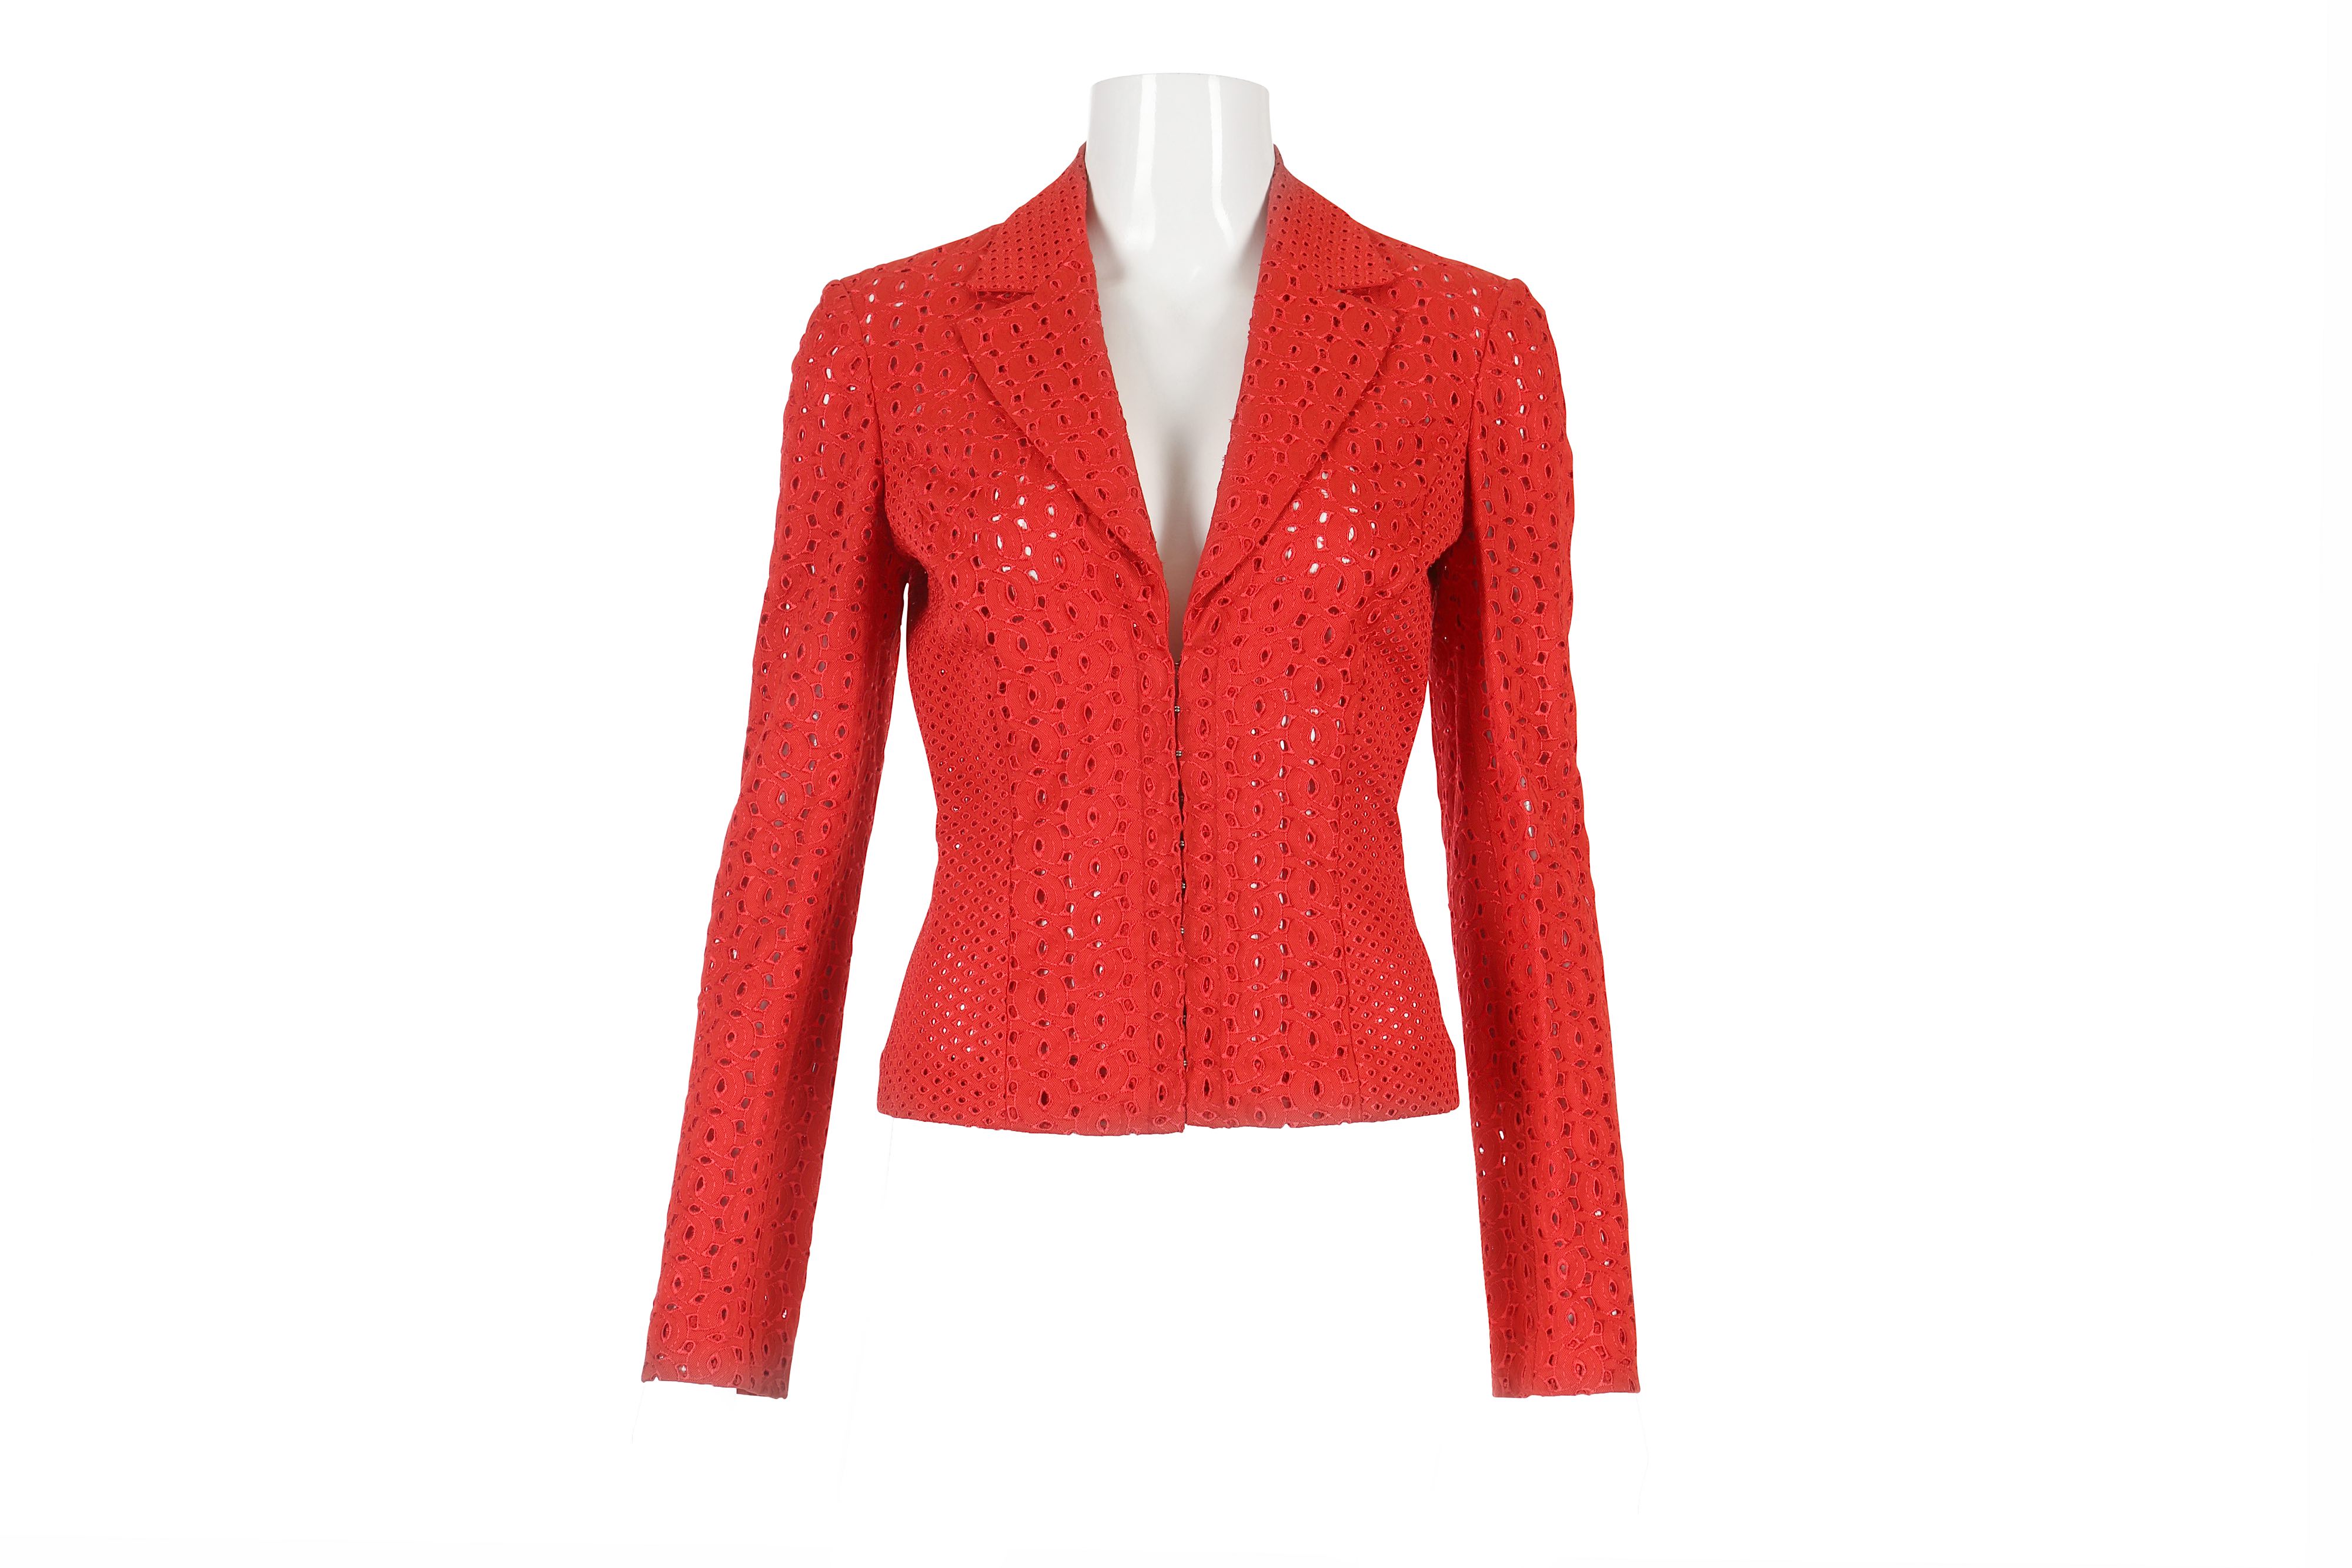 Gianni Versace Red Broderie Anglaise Jacket - size 38